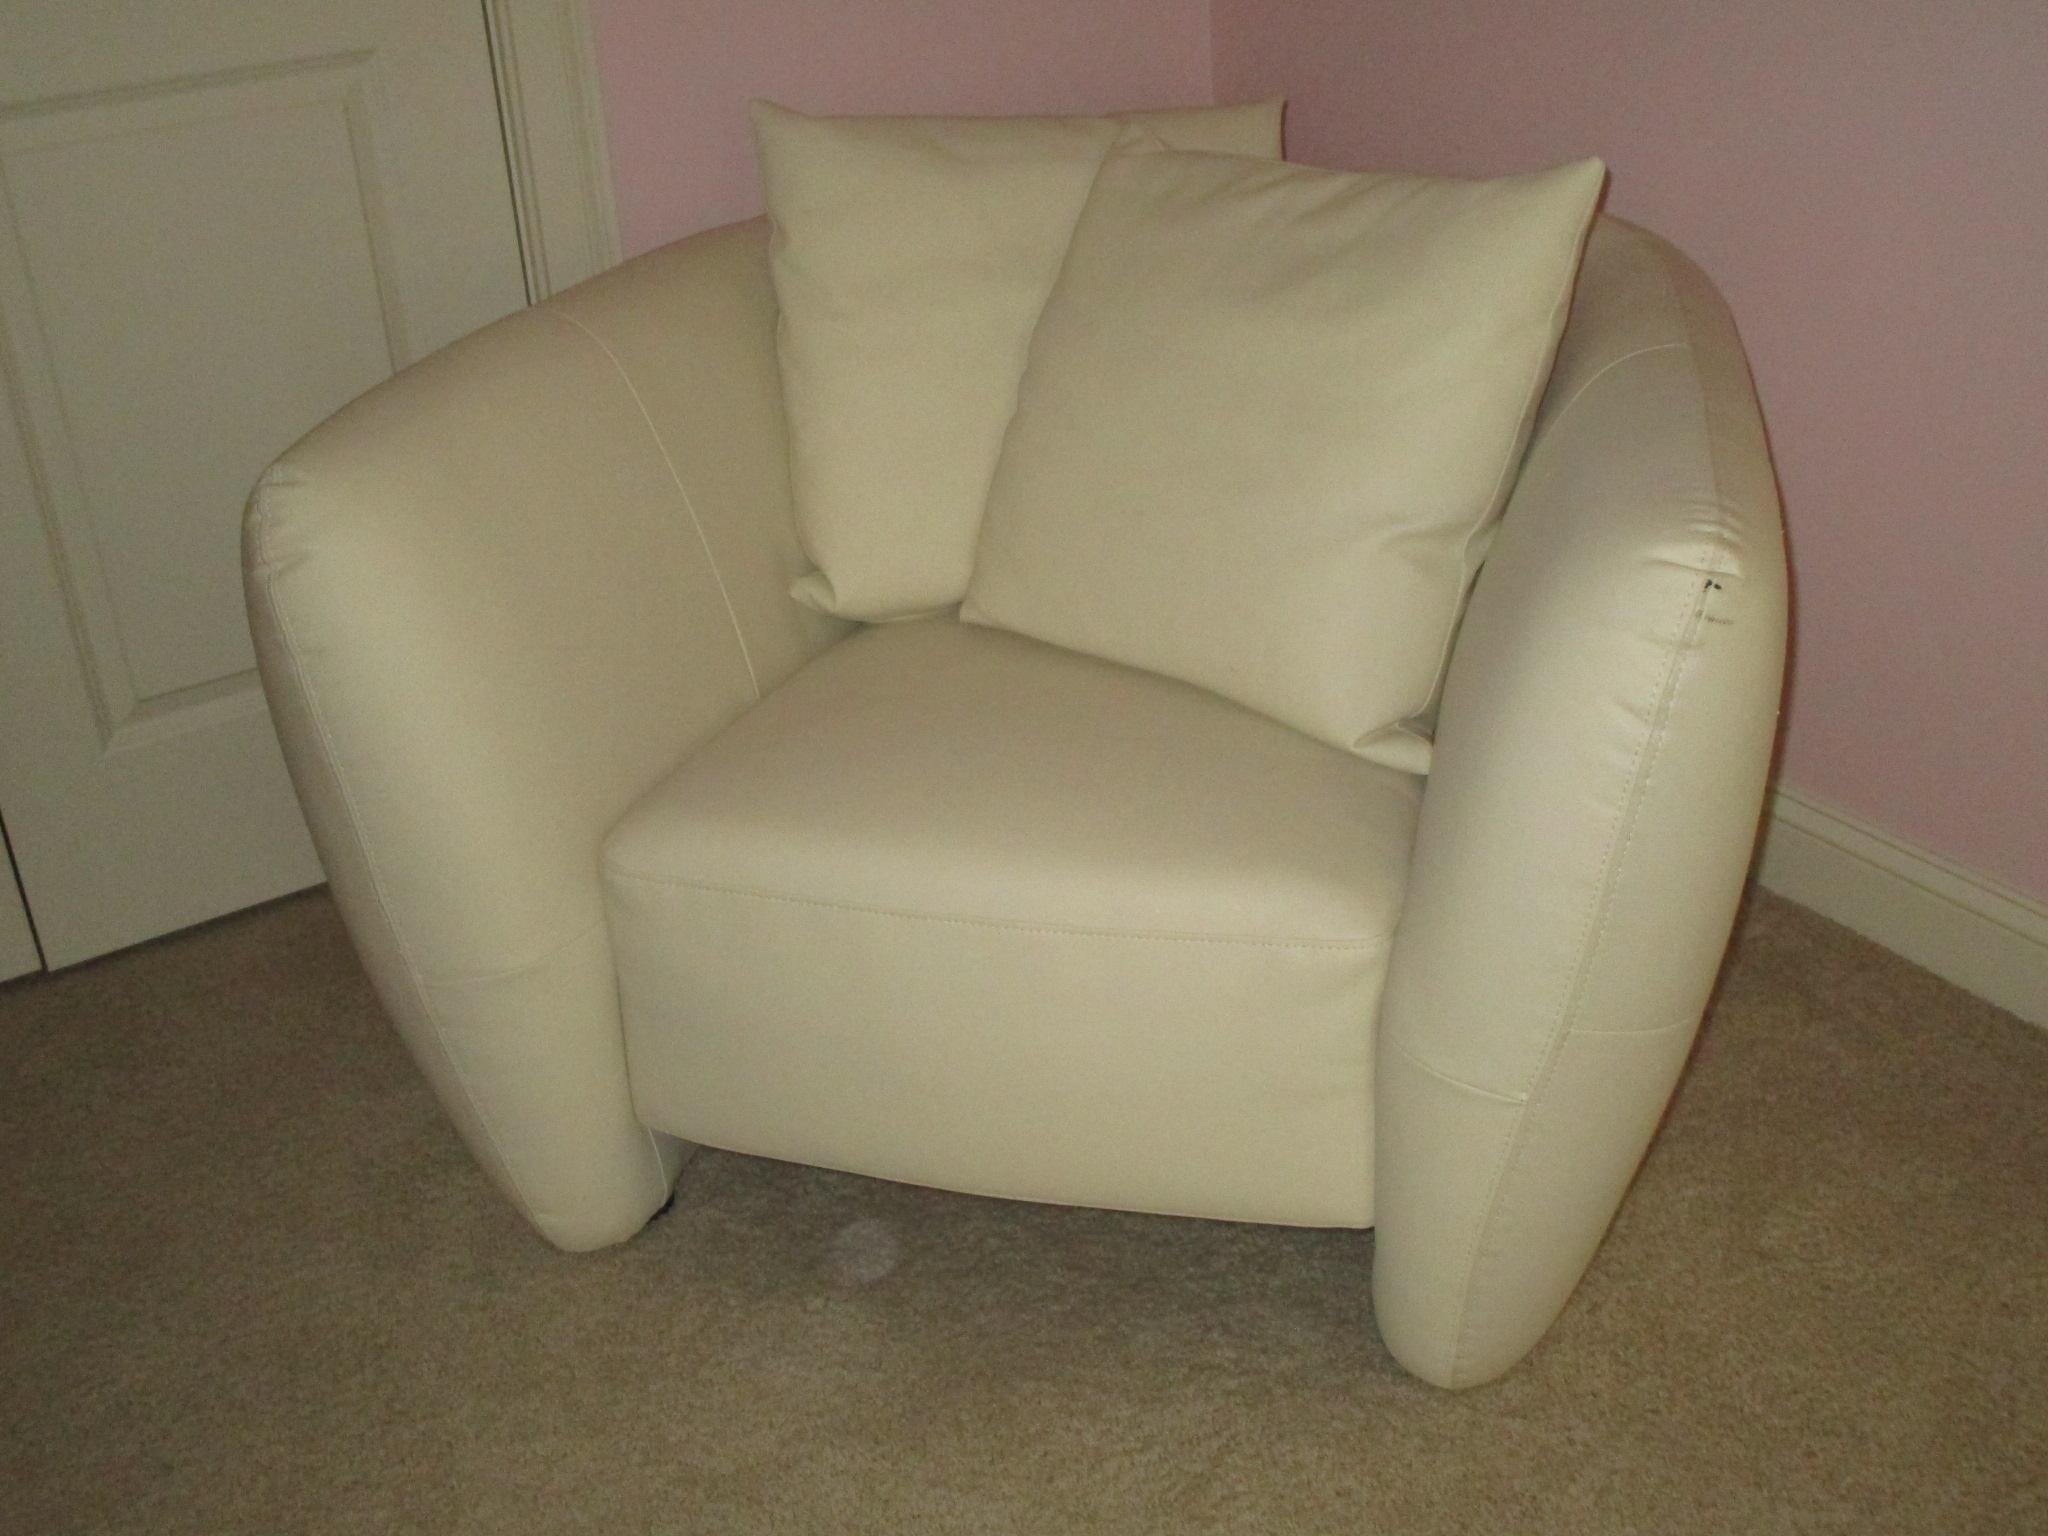 White Leather Chair w/Tufted Sides.  Small ink mark on arm rest, prick marks